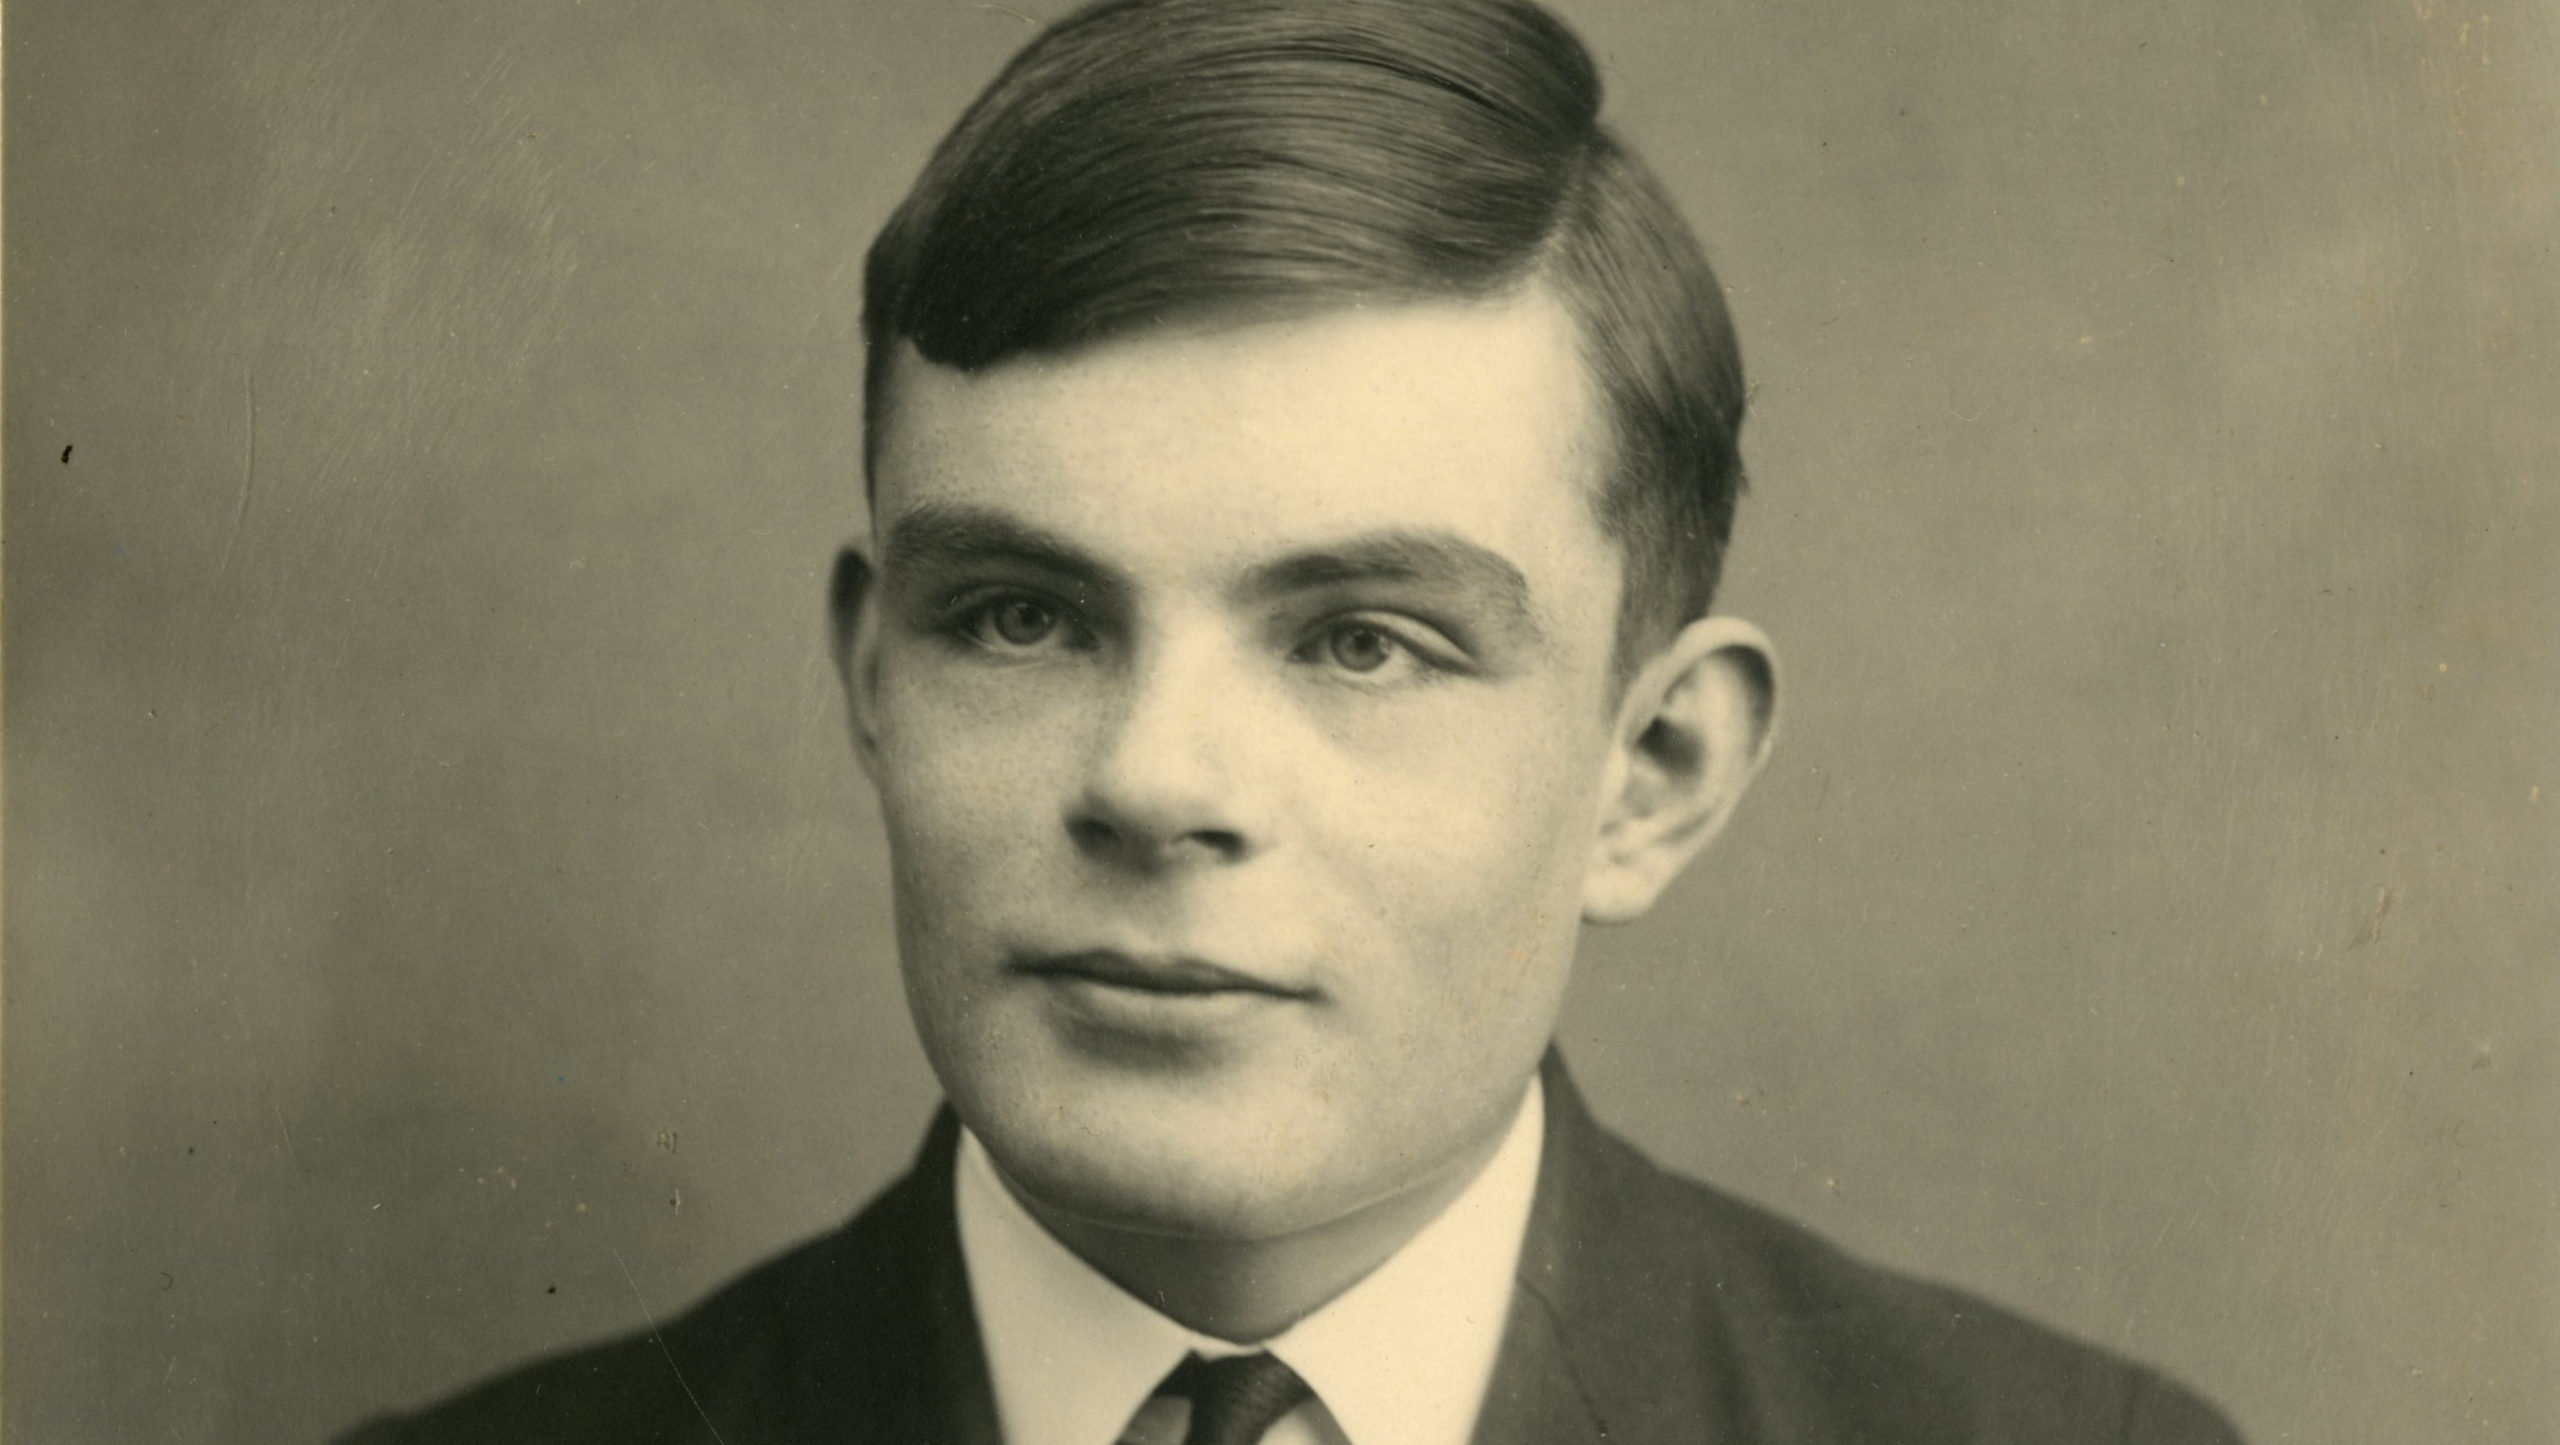 A master of innovation, leadership and technology – Alan Turing